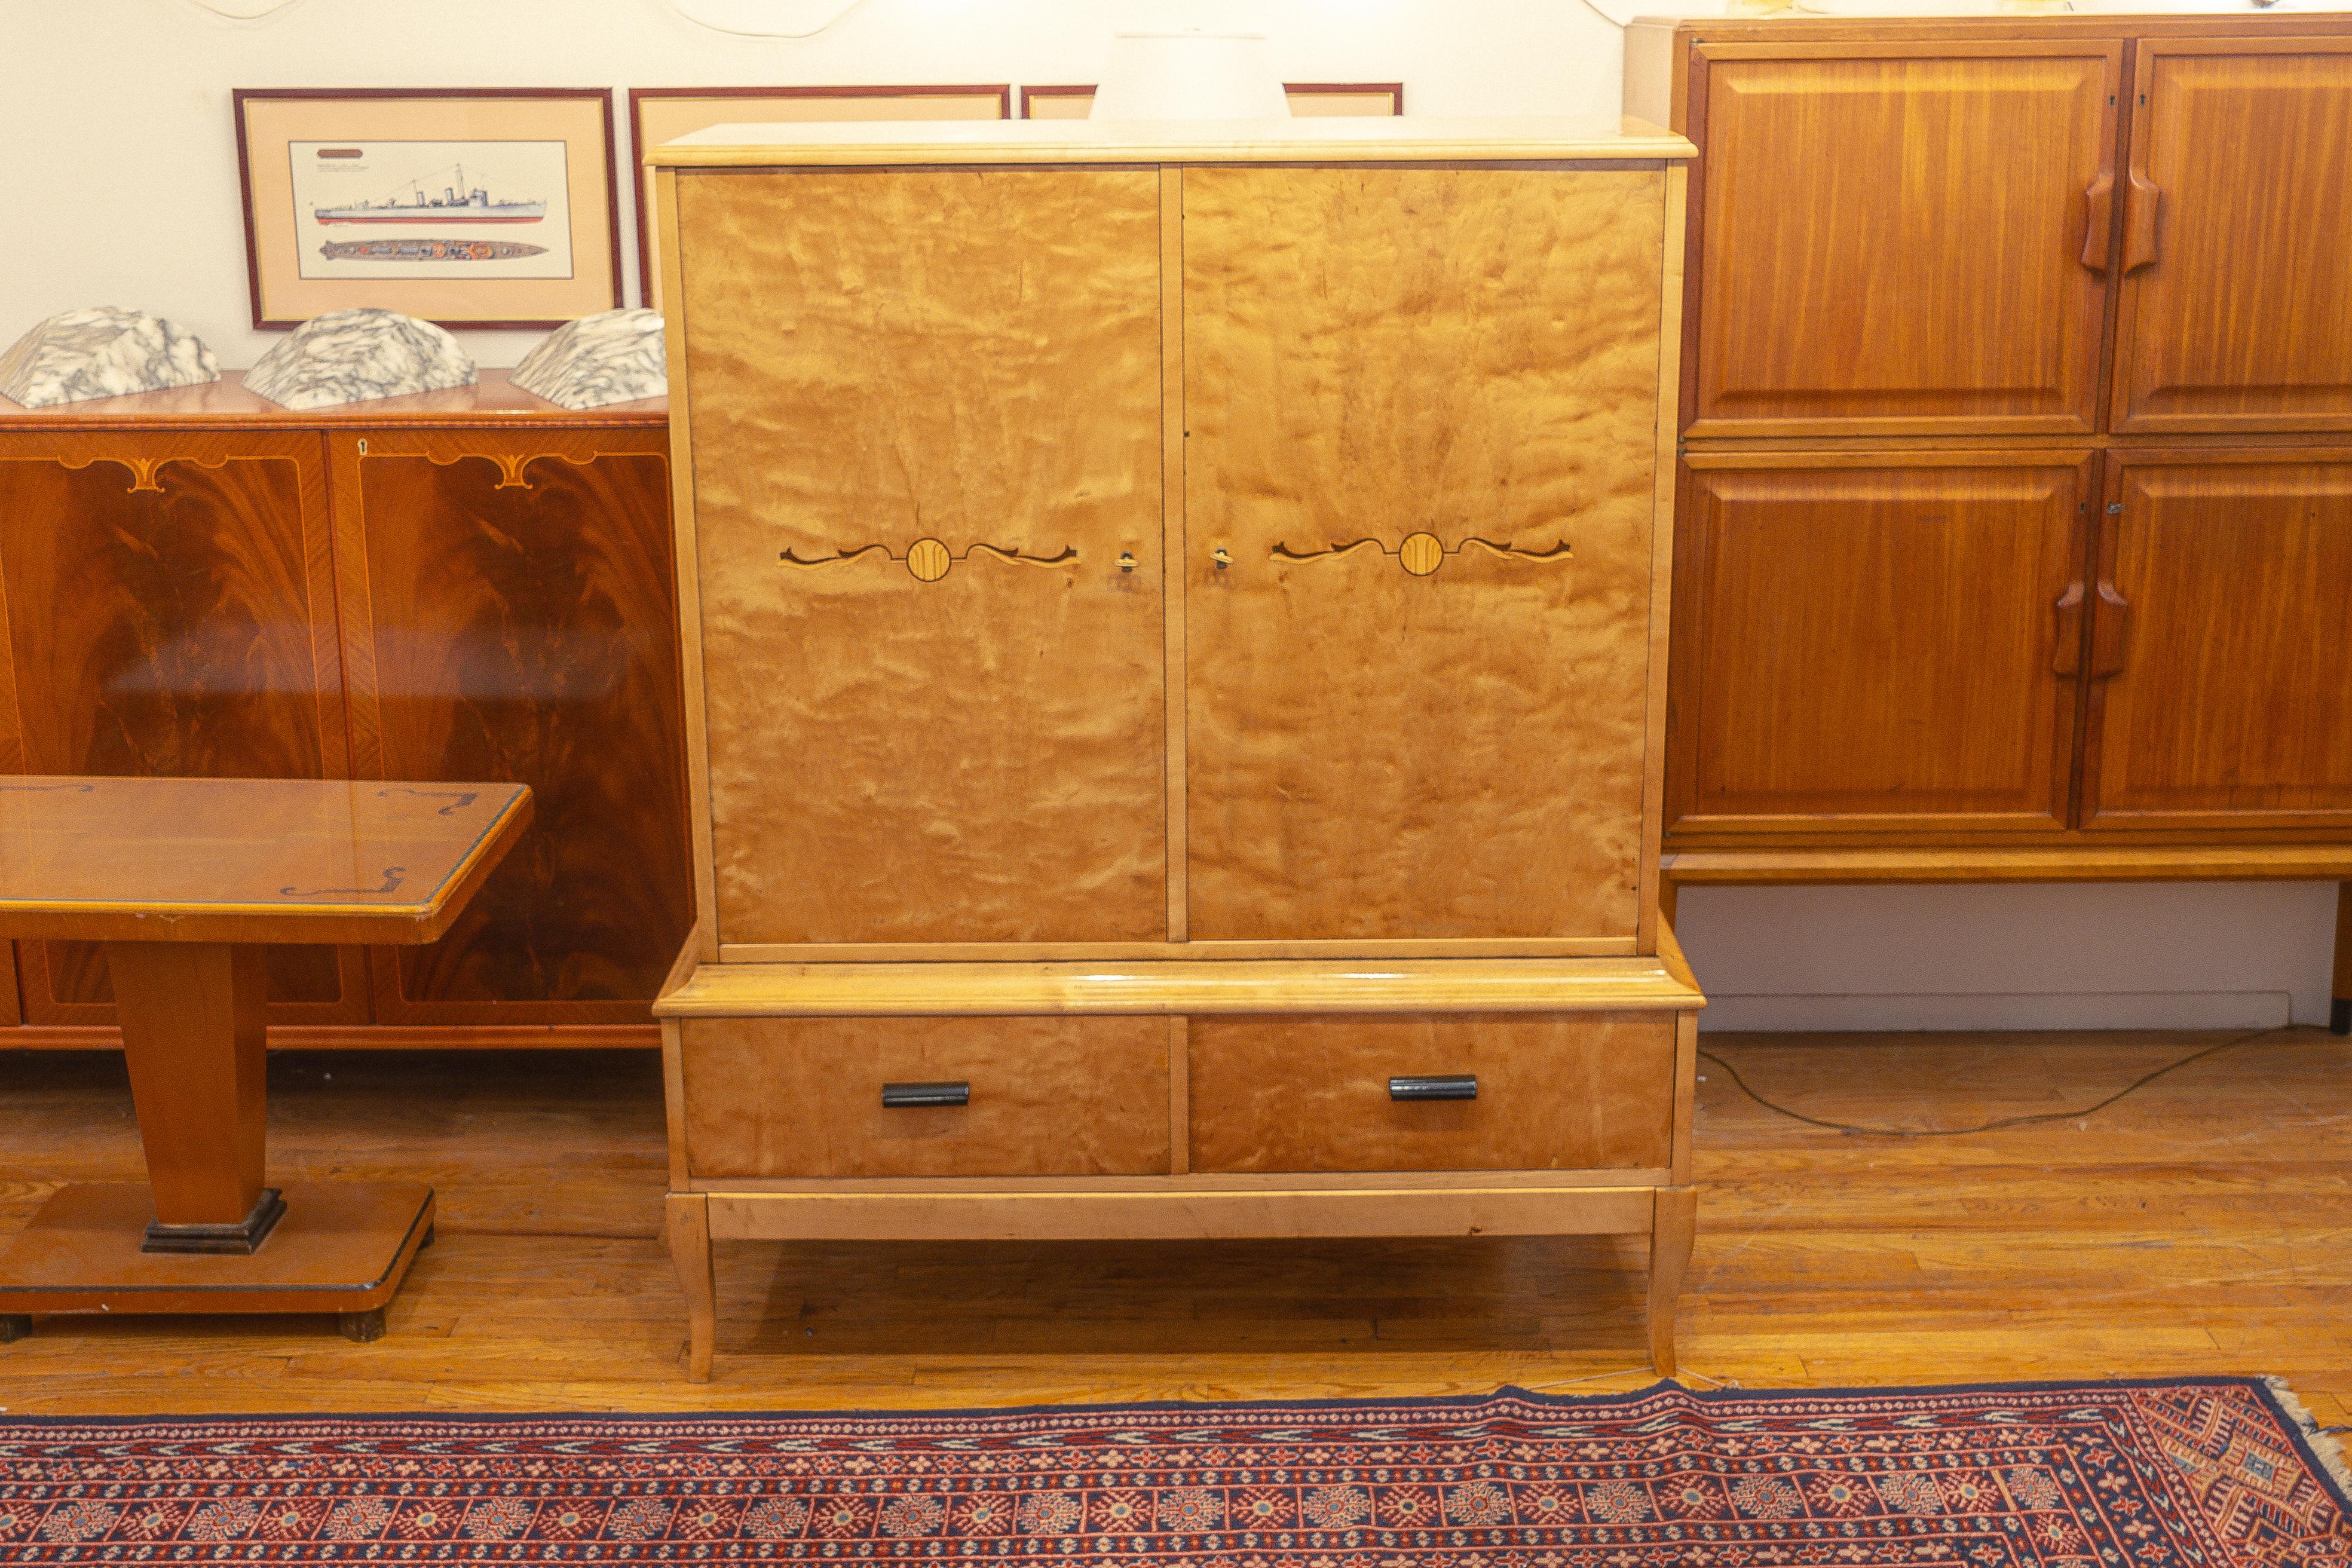 Constructed in the straightforward style of the start of the mid-modern period.  The Nordic birch veneers radiate warmth and add a natural element to the case itself.  Both doors are inlaid as was the fashion of the preceding Deco period.  